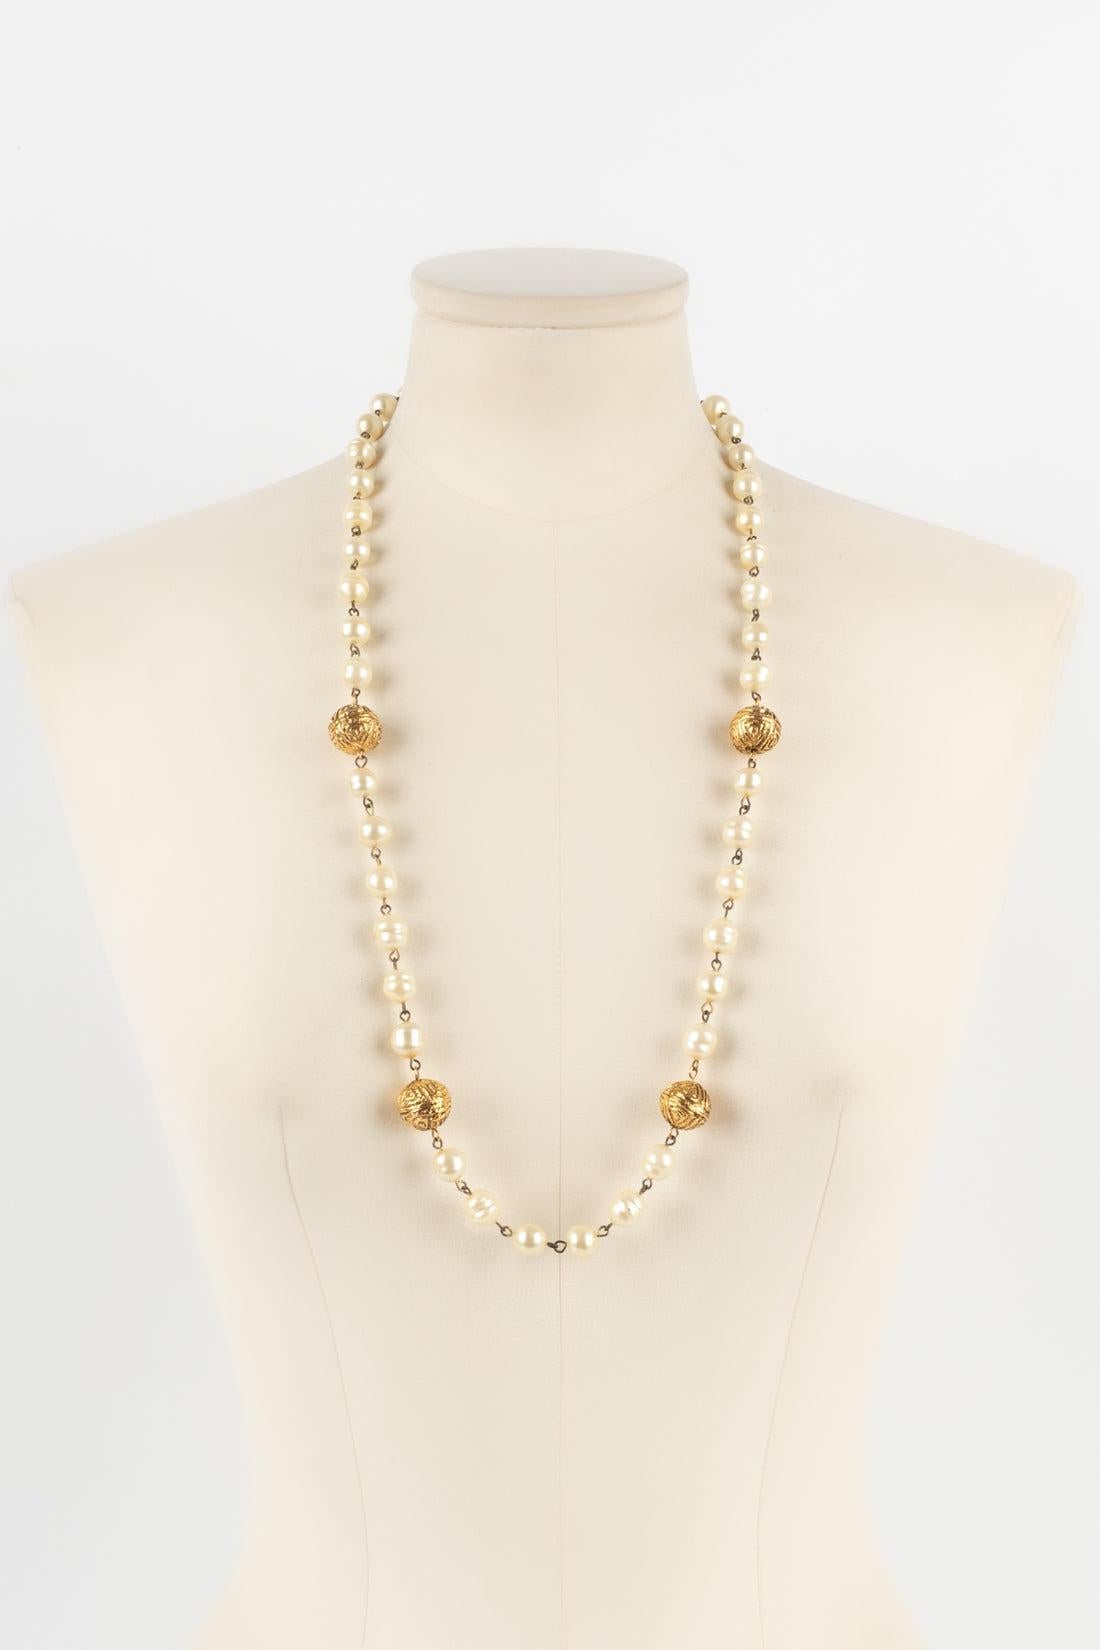 Chanel - (Made in France) Sautoir with costume pearls and golden metal spheres. 1985 Collection.

Additional information:
Condition: Good condition
Dimensions: Length: 80 cm
Period: 20th Century

Seller Reference: CB182
